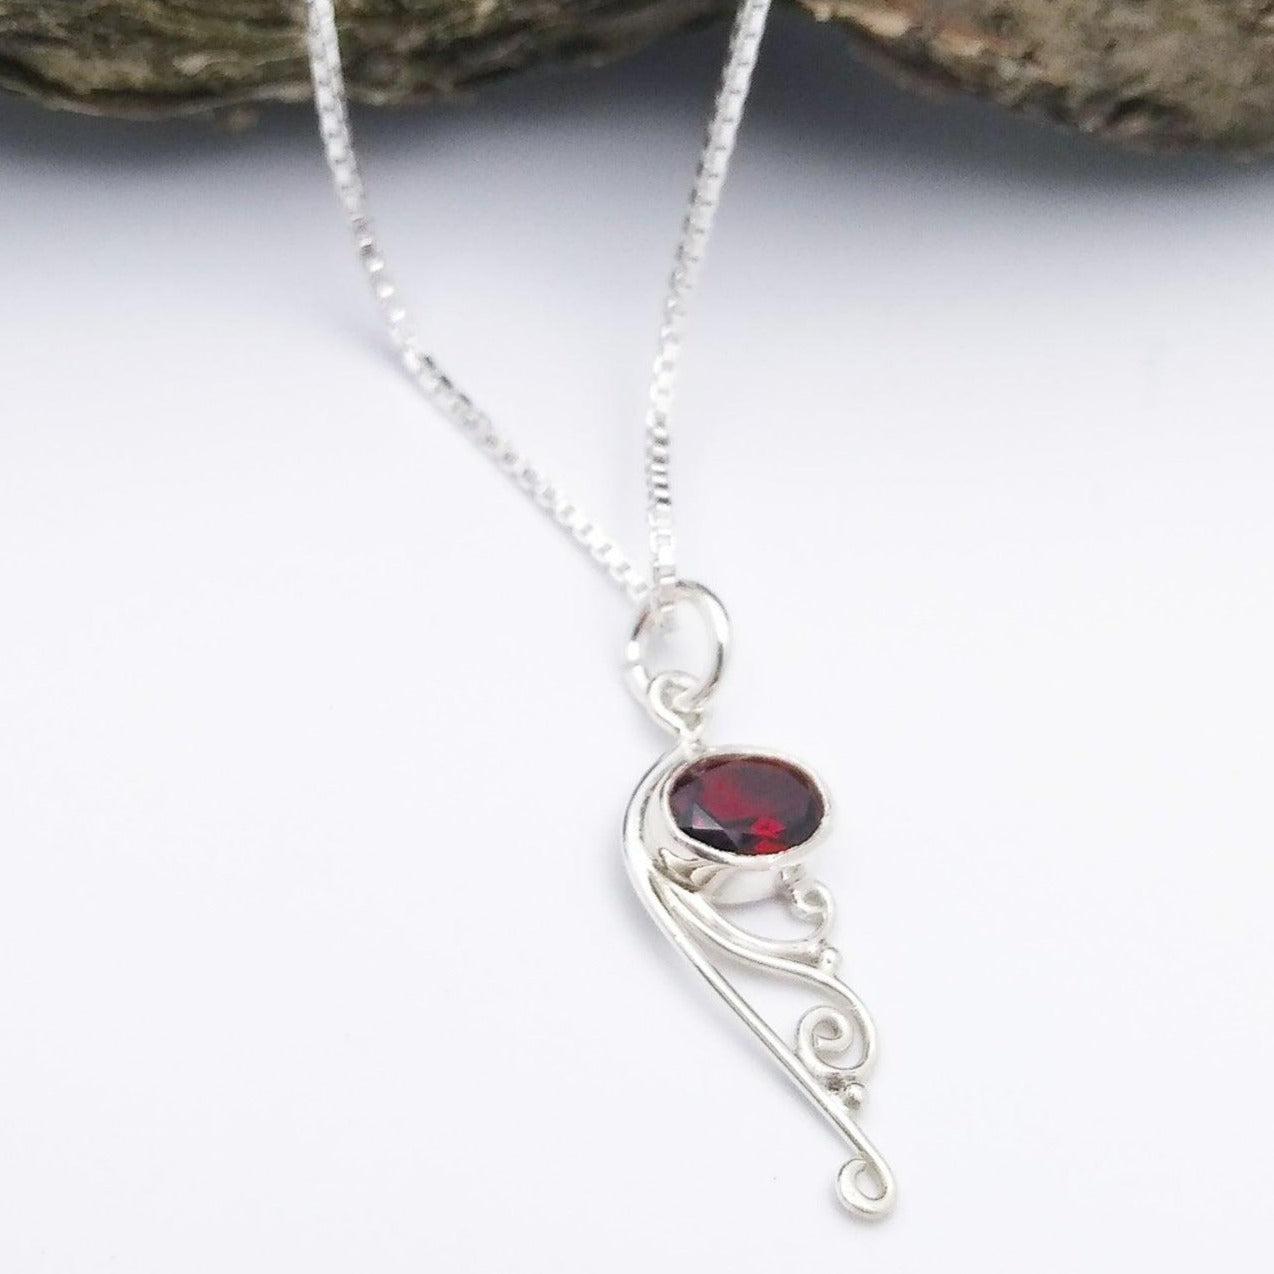 Sterling silver pendant with Garnet and filigree at the bottom.